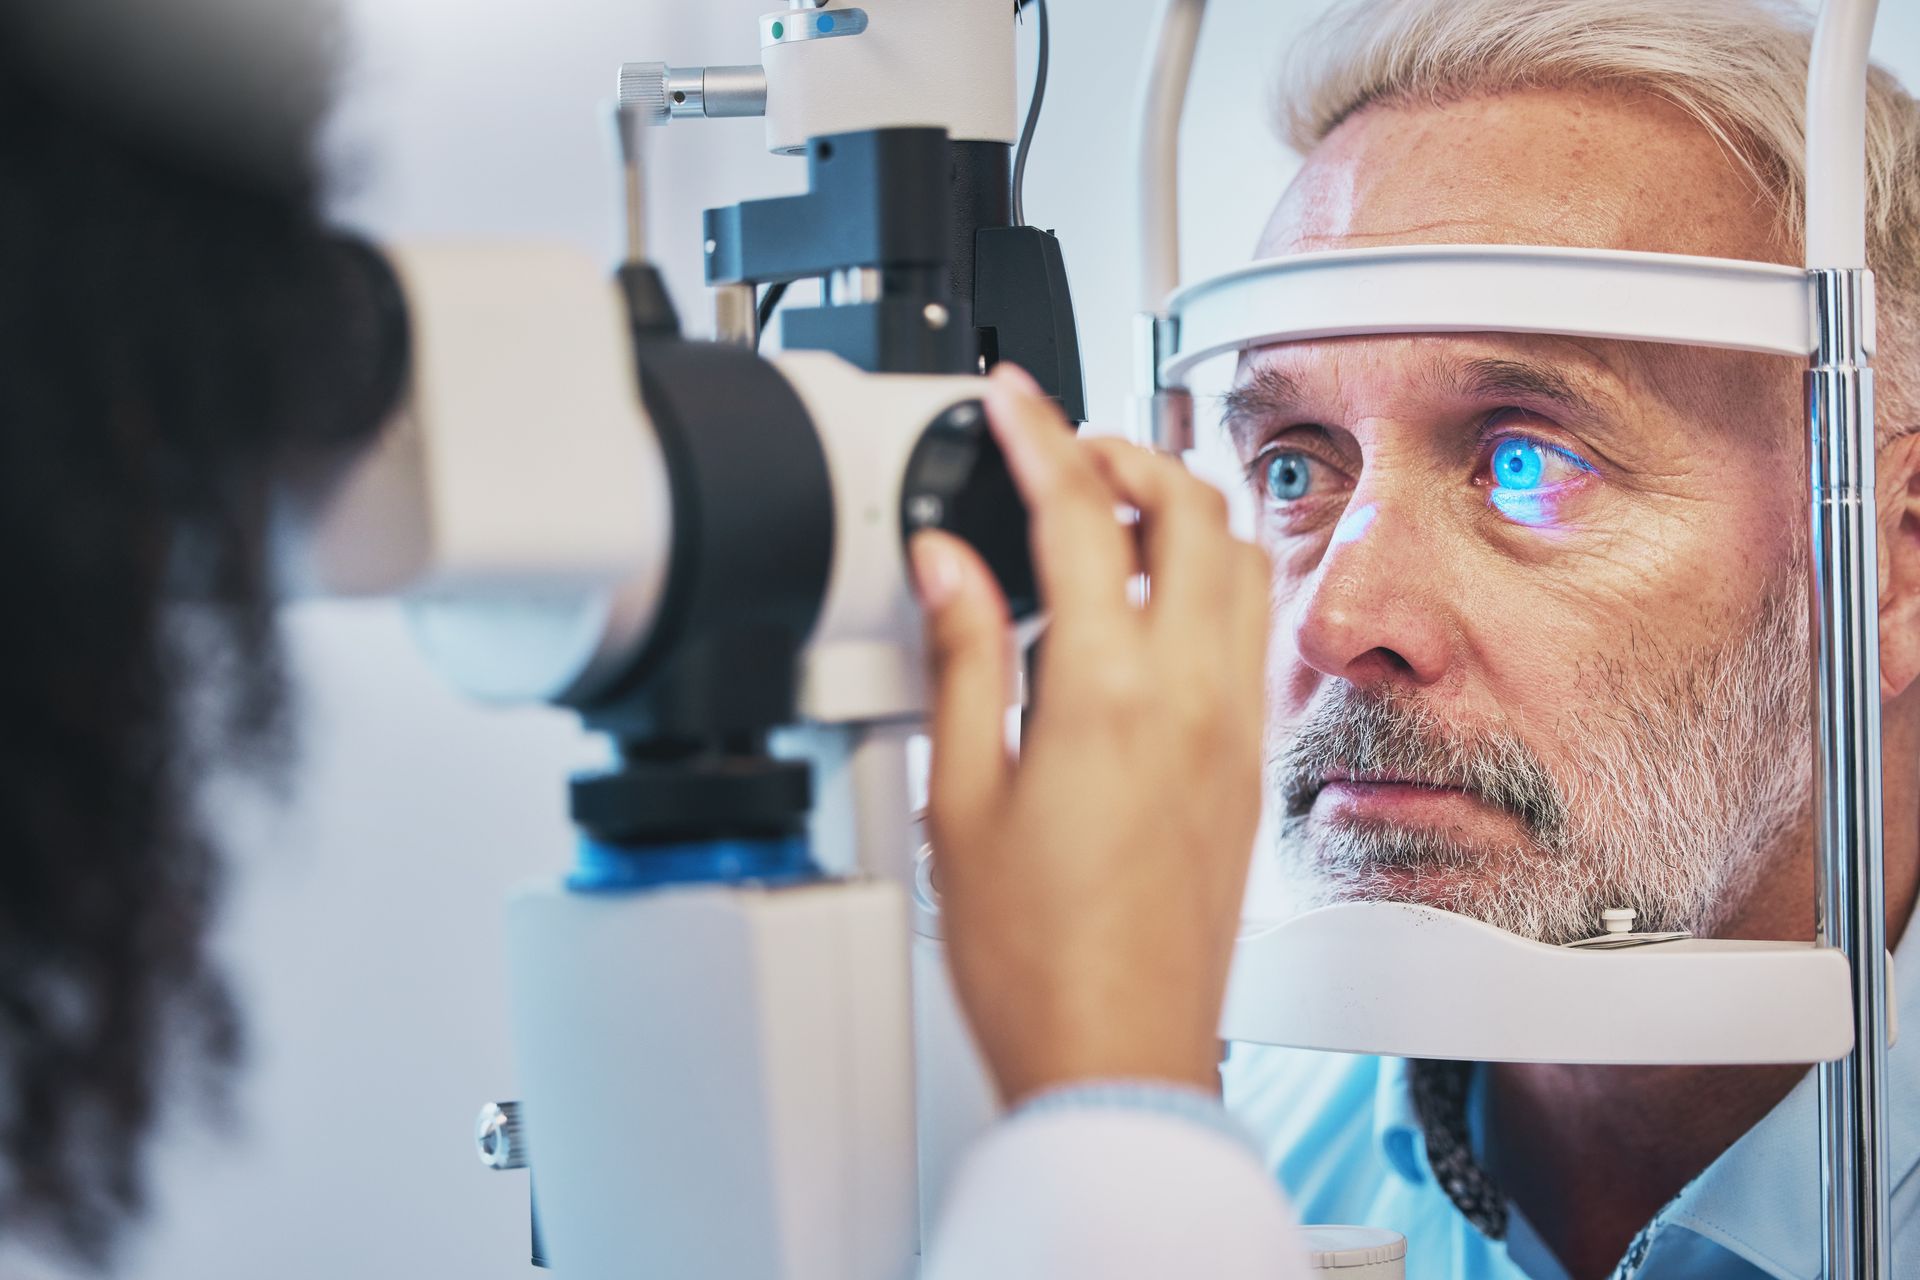 A man is getting his eyes examined by an ophthalmologist.